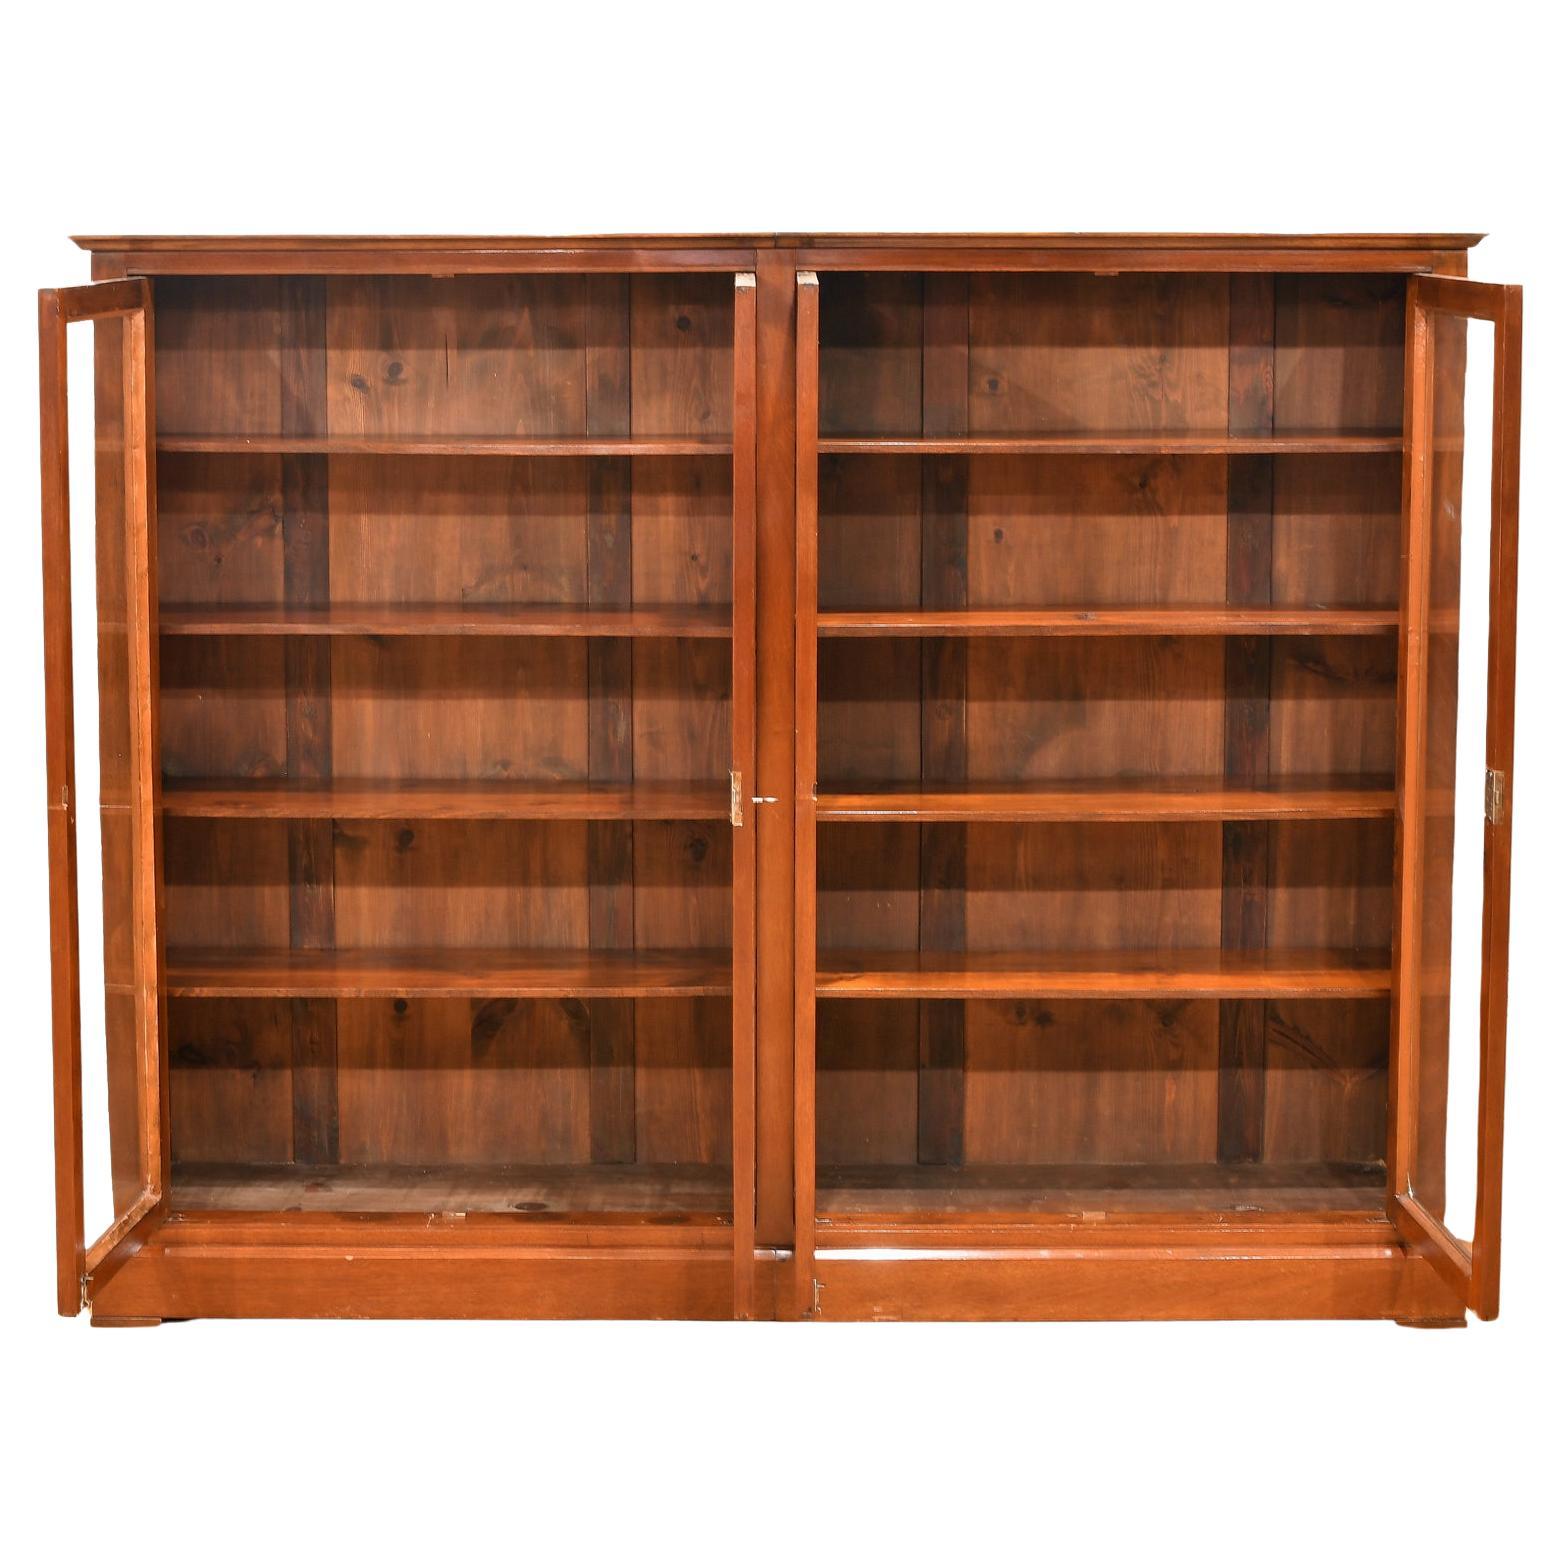 Polished Pair of Art Deco Bookcases in Mahogany with Glass Paneled Doors, Denmark, c 1920